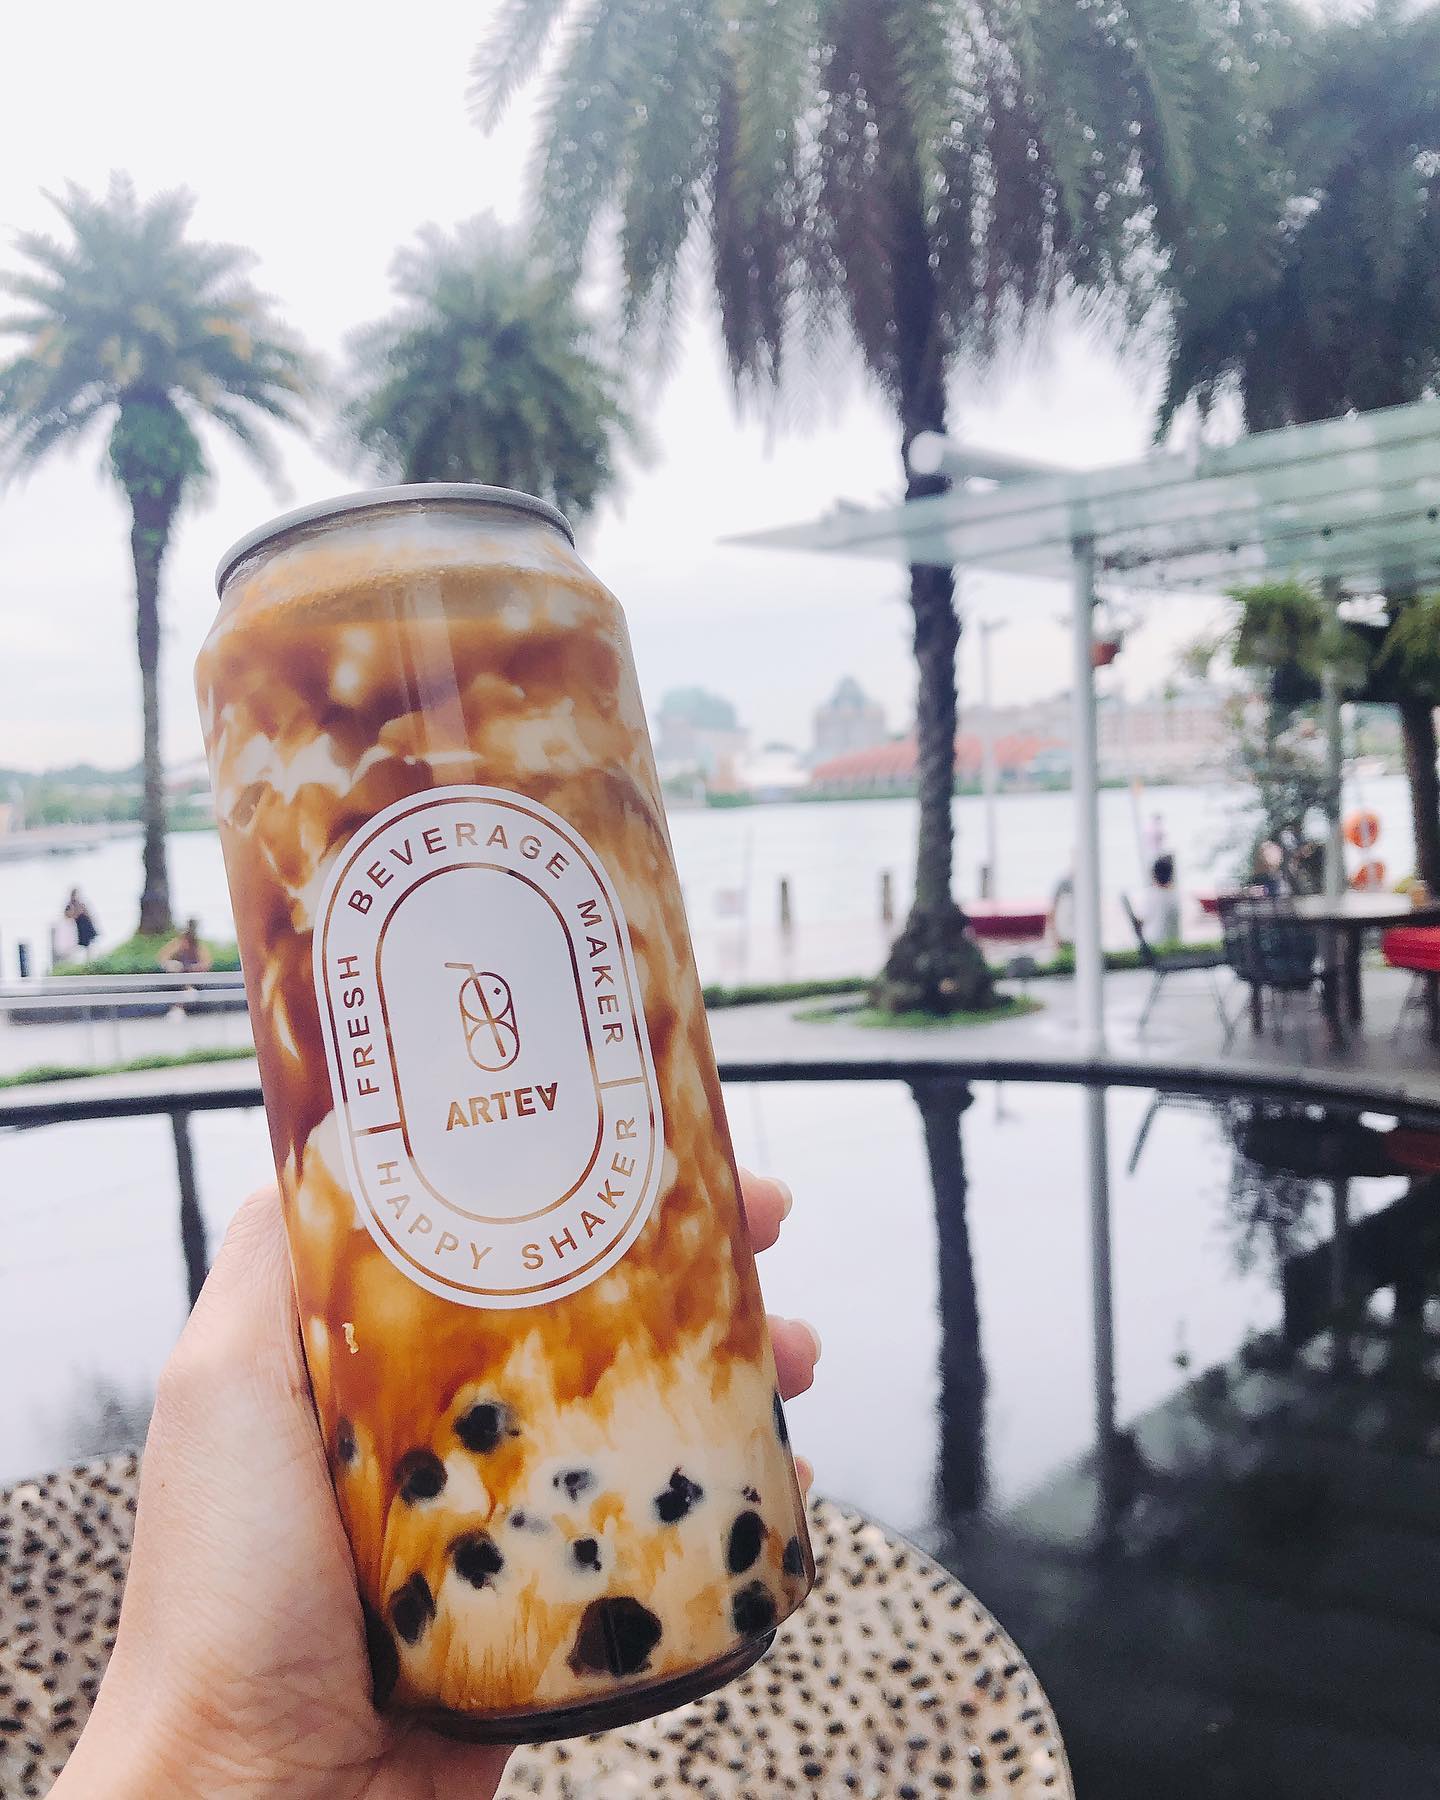 This cafe in Singapore sells Brown Sugar Bubble Milk in a can for $5.20 - 6